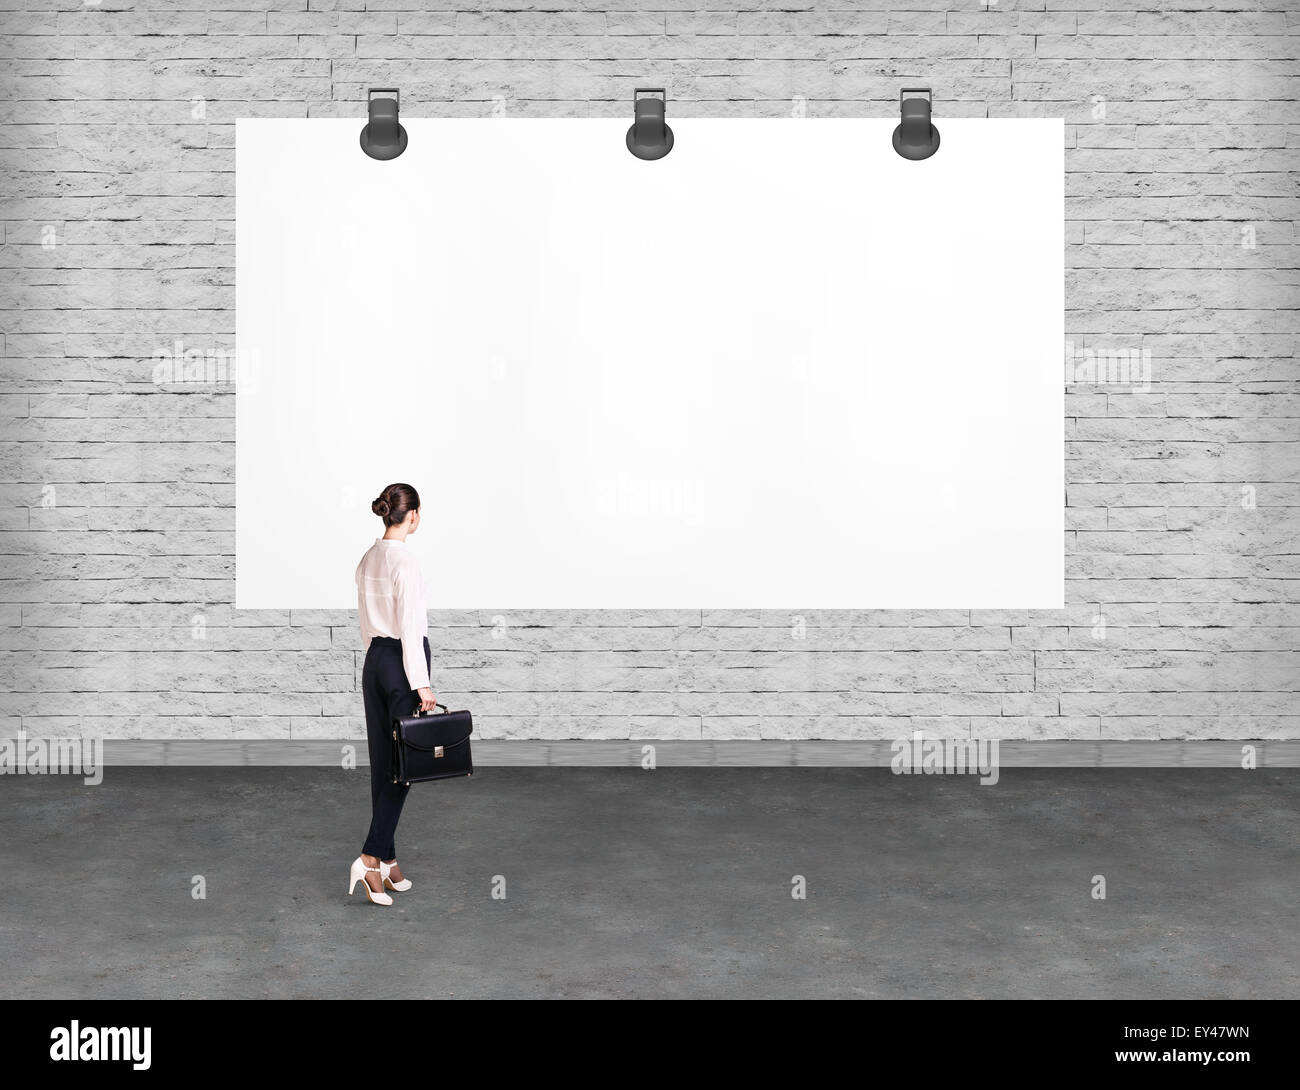 Elegant business woman looking at banner. Stock Photo